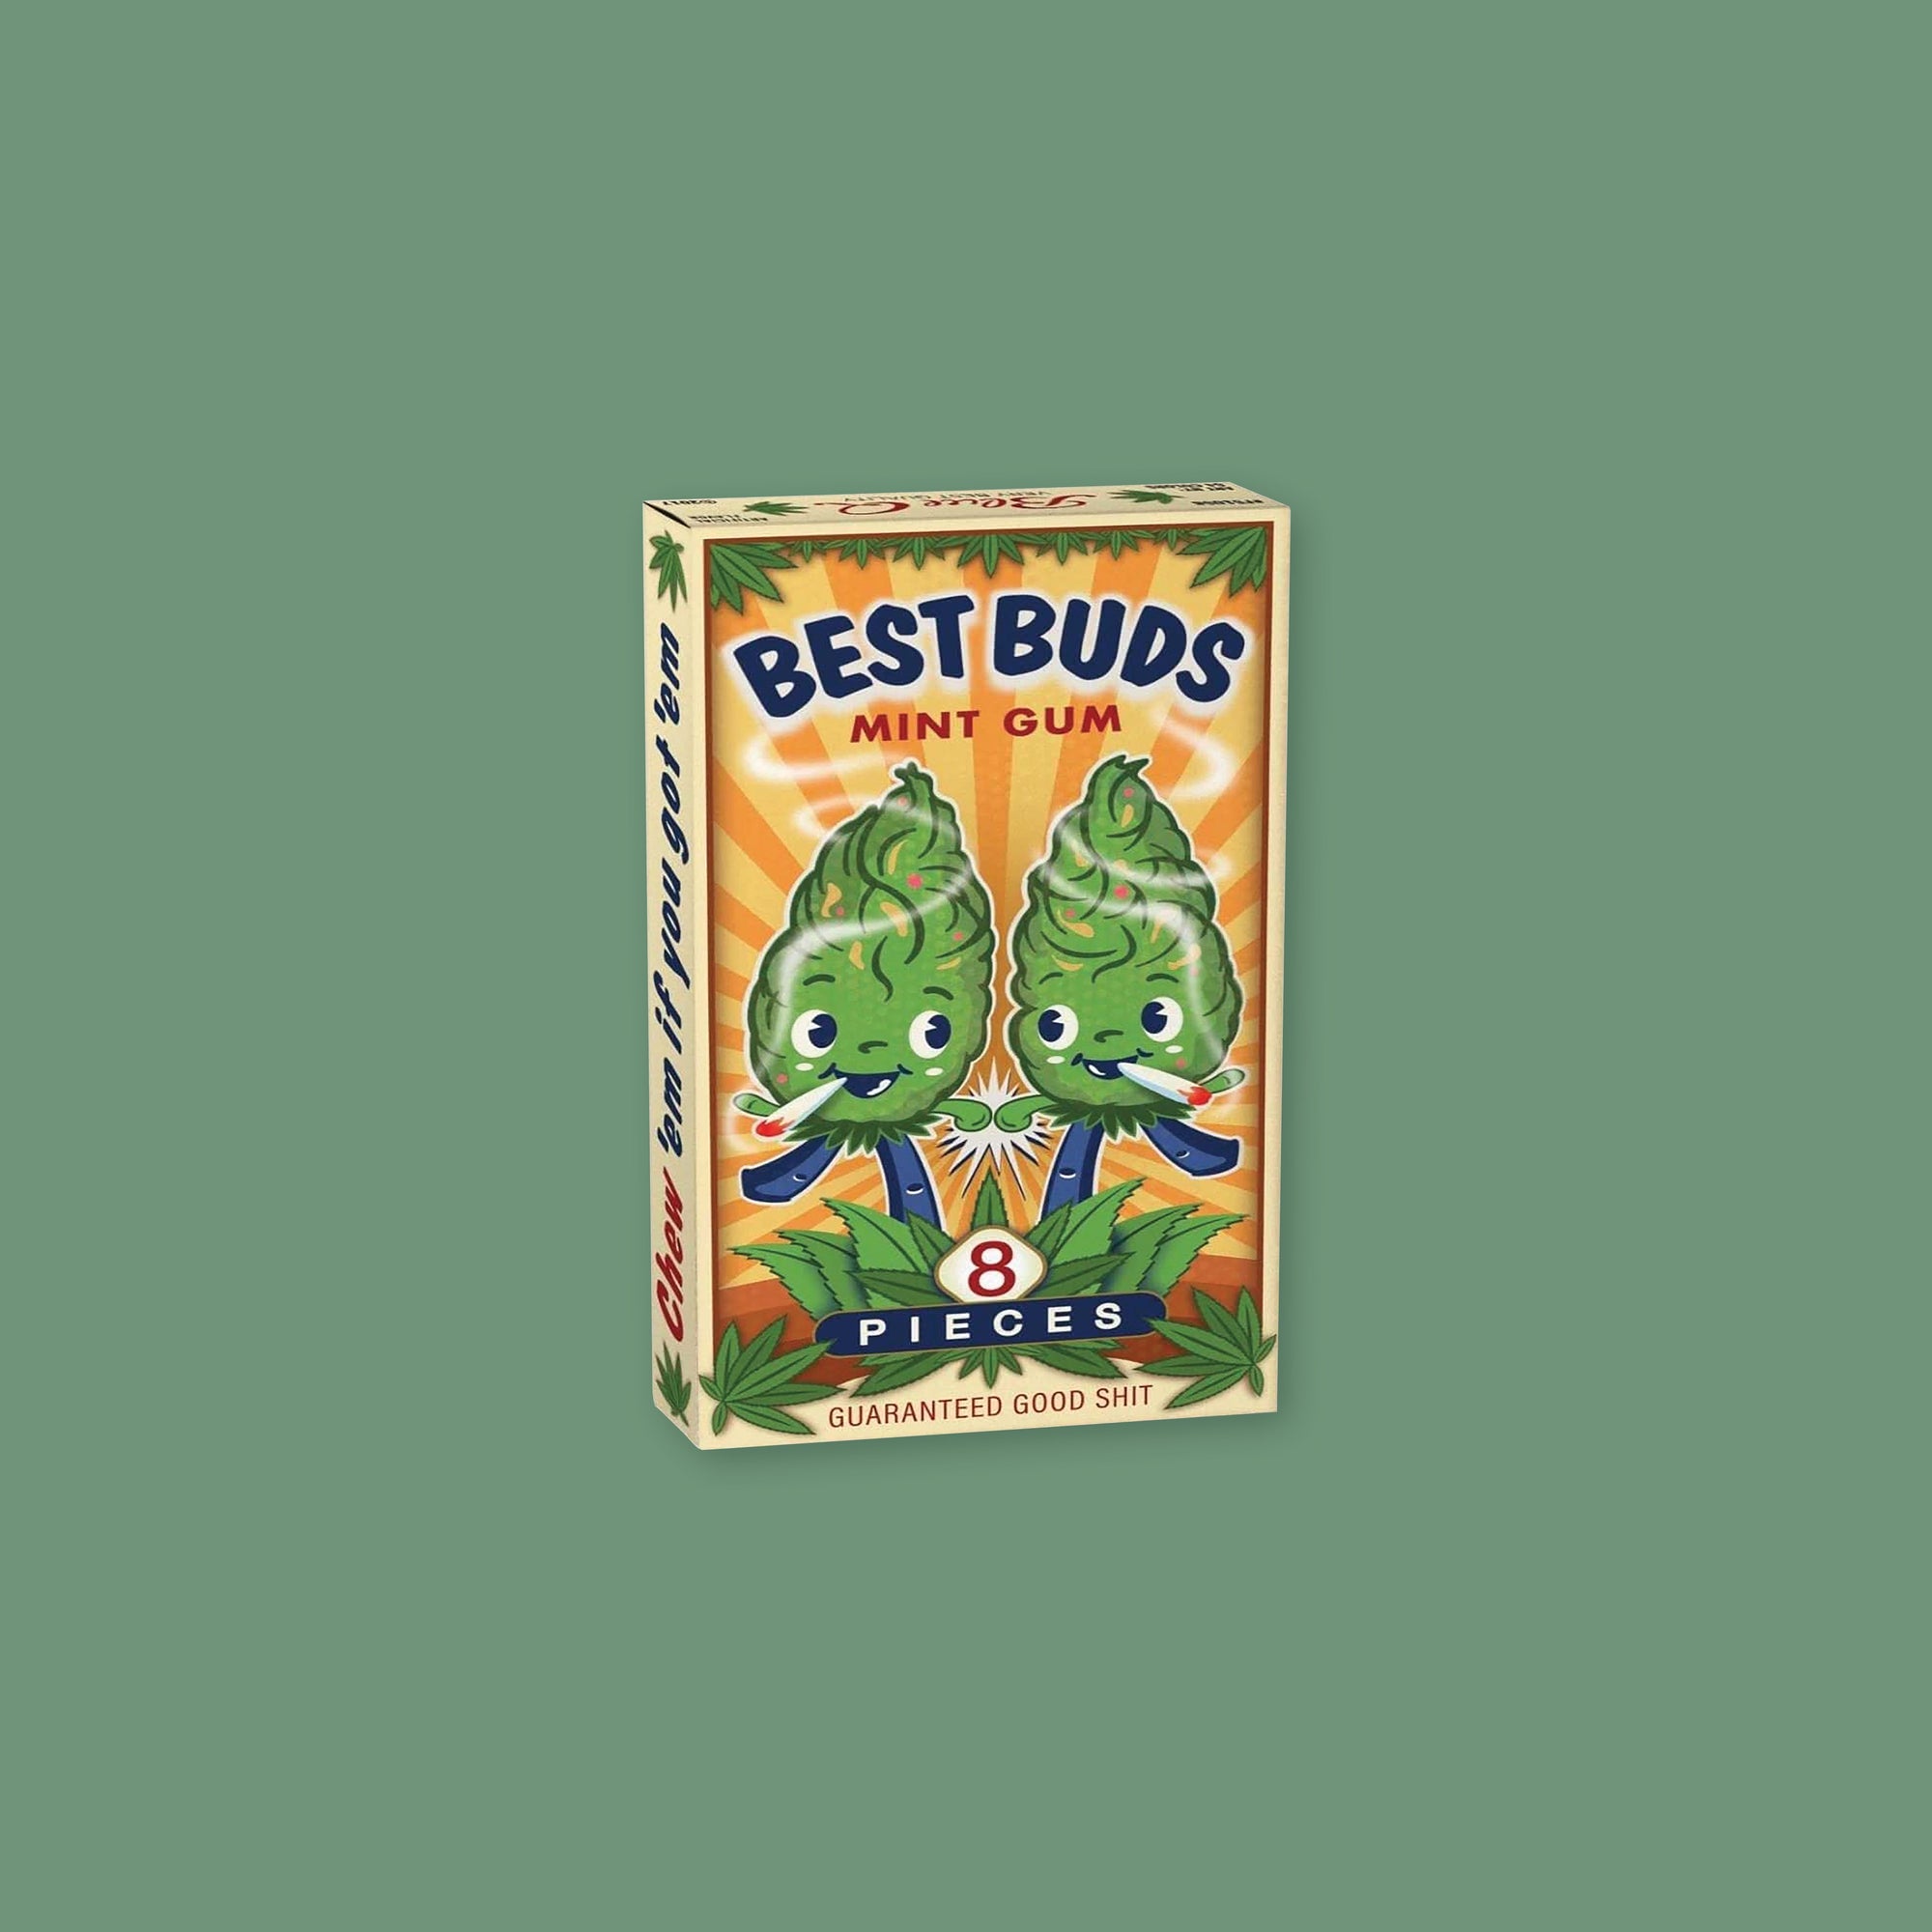 On a mossy green background sits a colorful package of Best Buds Mint Gum. It has an illustration of two "buds" friends smoking marijuana with marijana leaves around the package. I says "GUARANTEED GOOD SHIT" in red, all caps block font. On the side it says "Chew 'em if you got 'em." 8 pieces. 